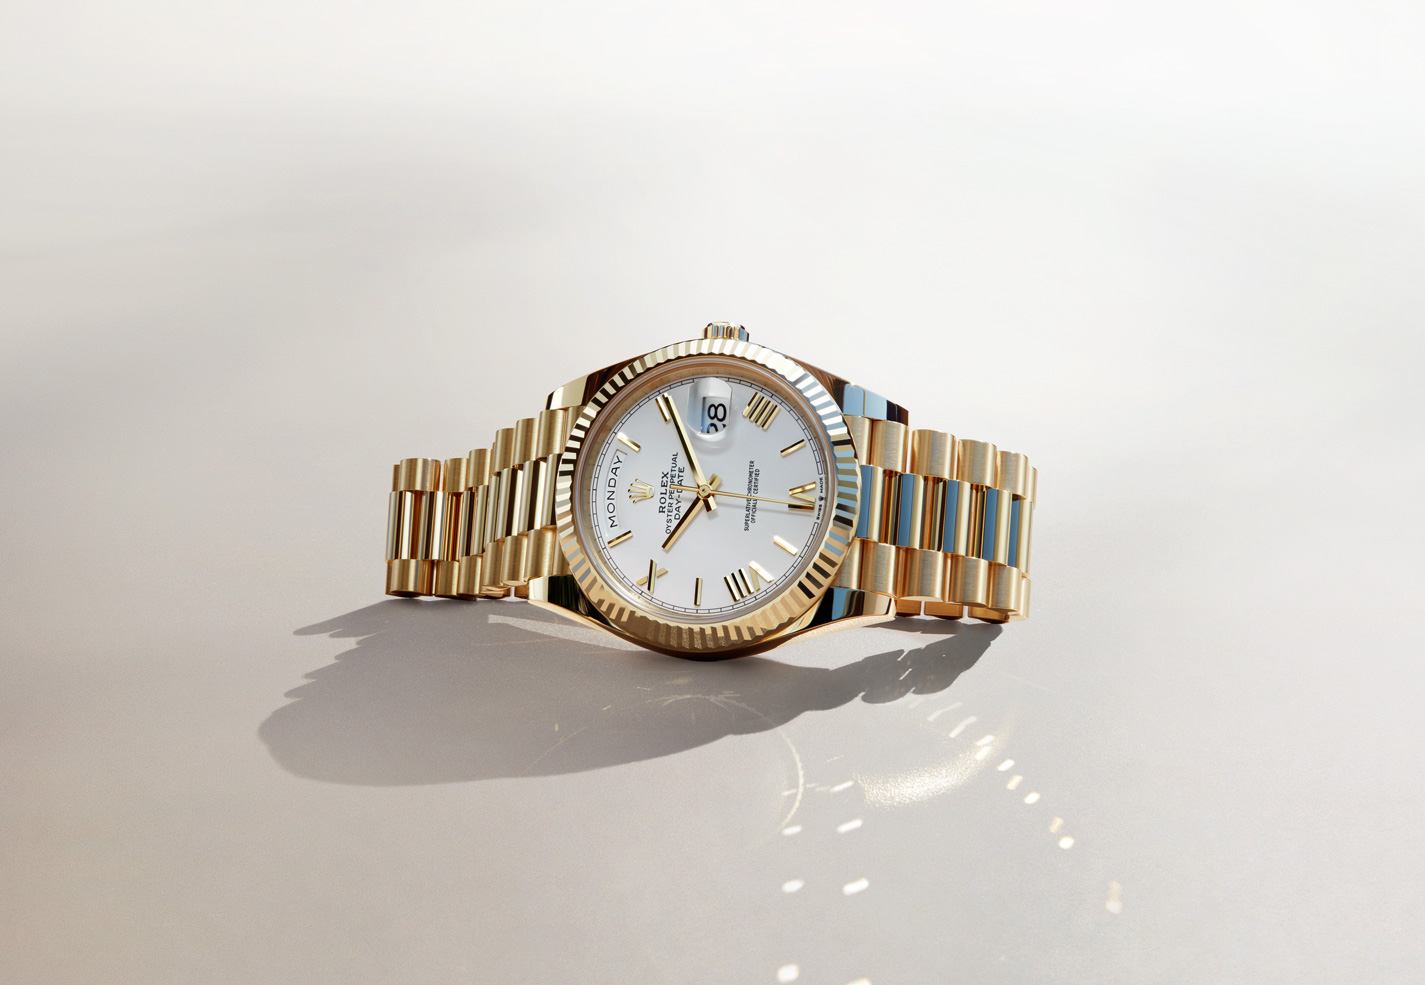 Two-tone Rolex Oyster Perpetual watch with link strap